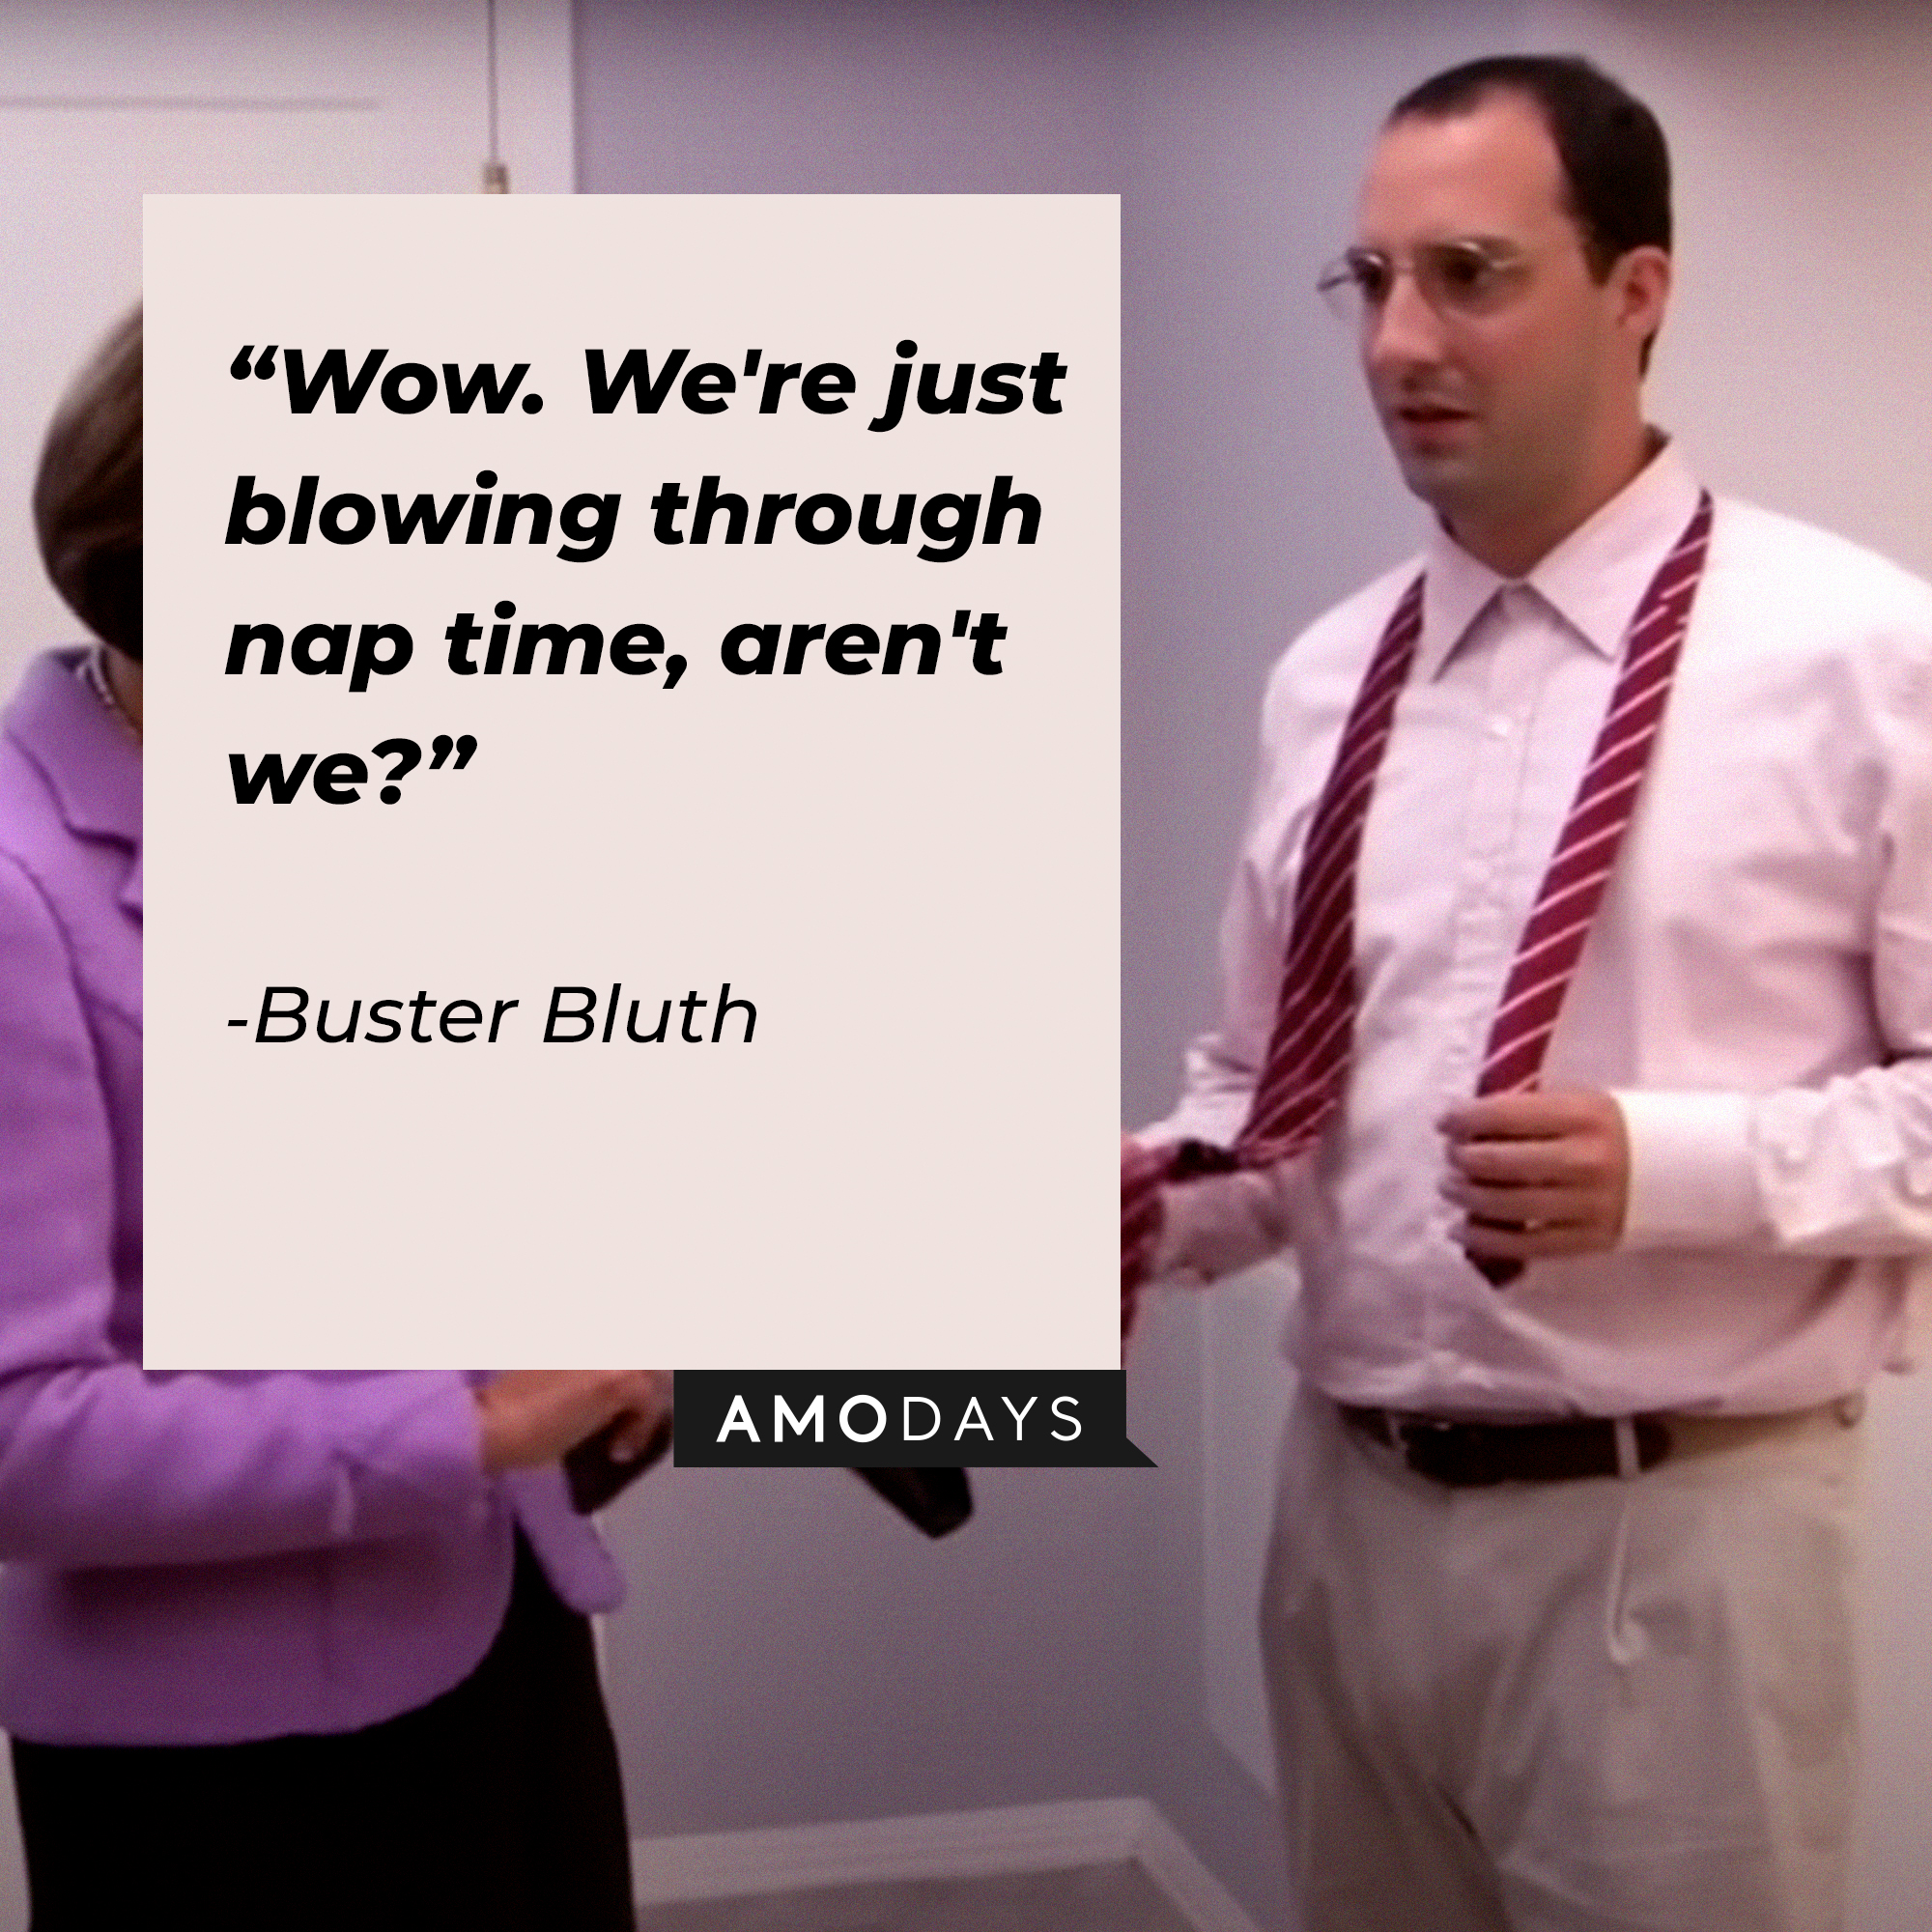 Buster Bluth, with his quote: “Wow. We're just blowing through nap time, aren't we?” | Source:  youtube.com/arresteddev